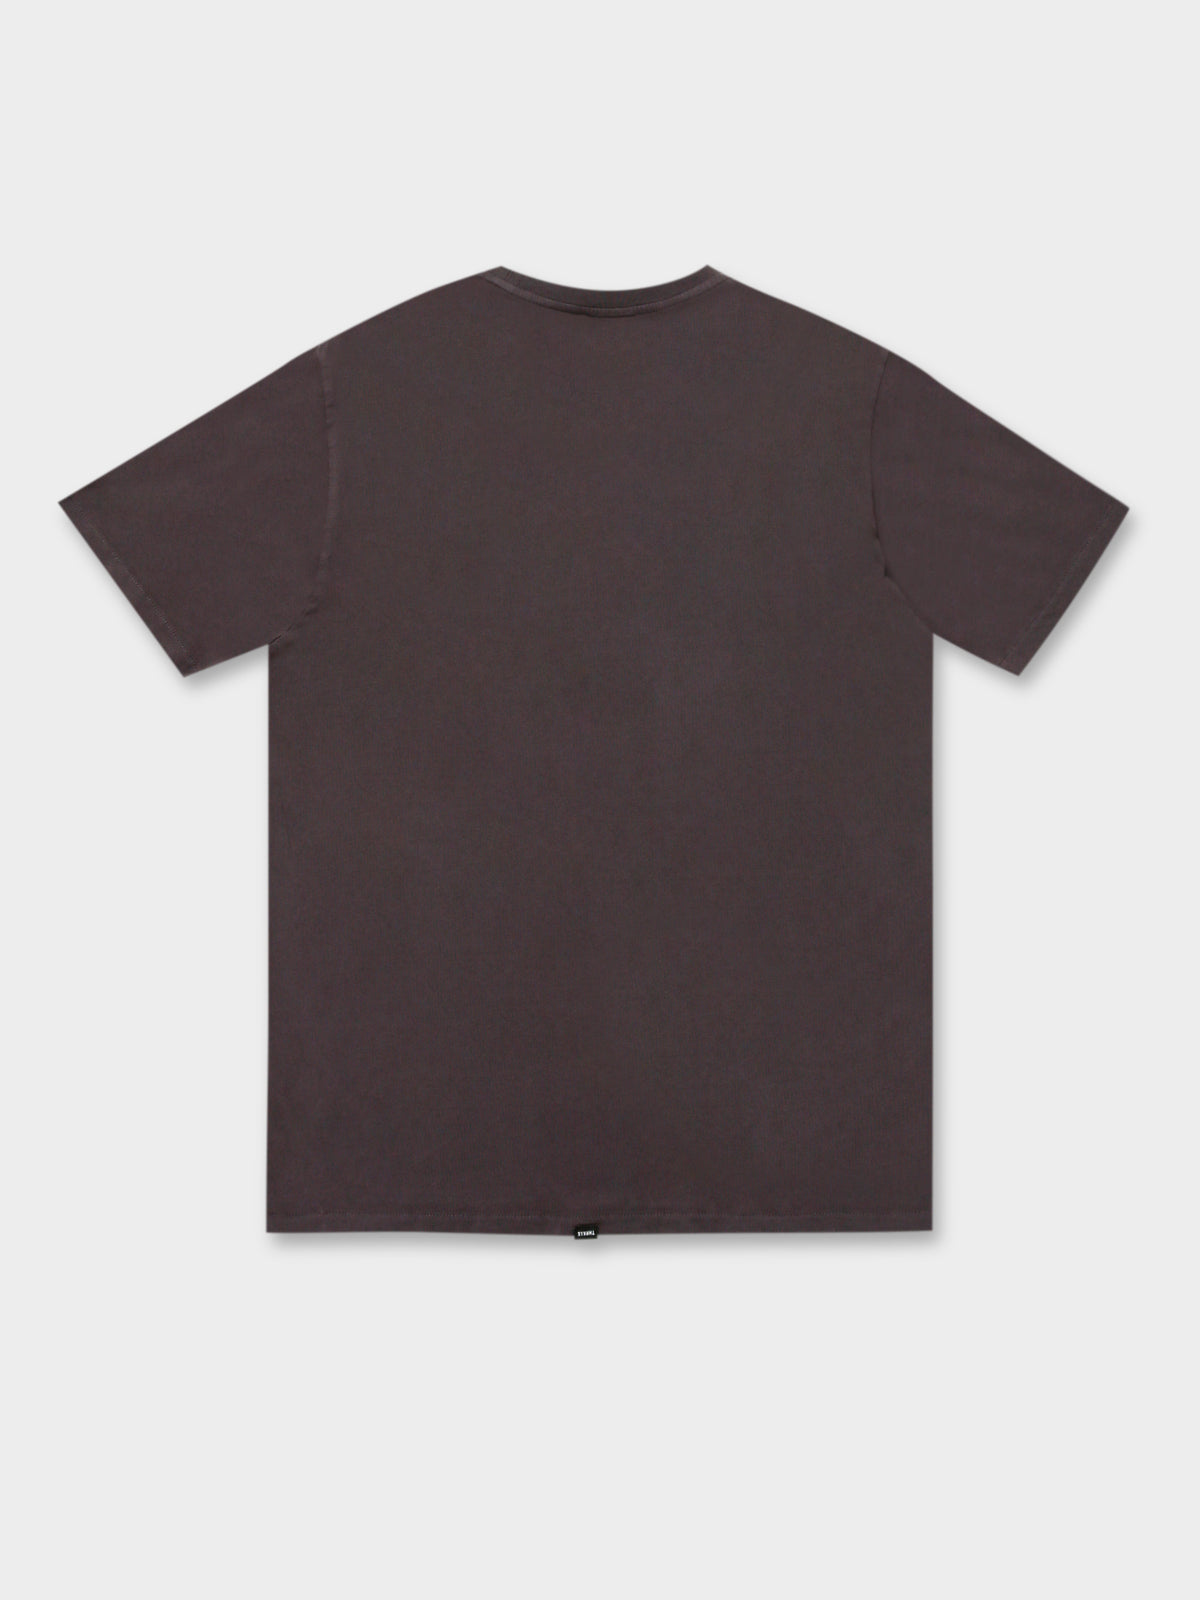 Cassidys Merch Fit T-Shirt in Charcoal